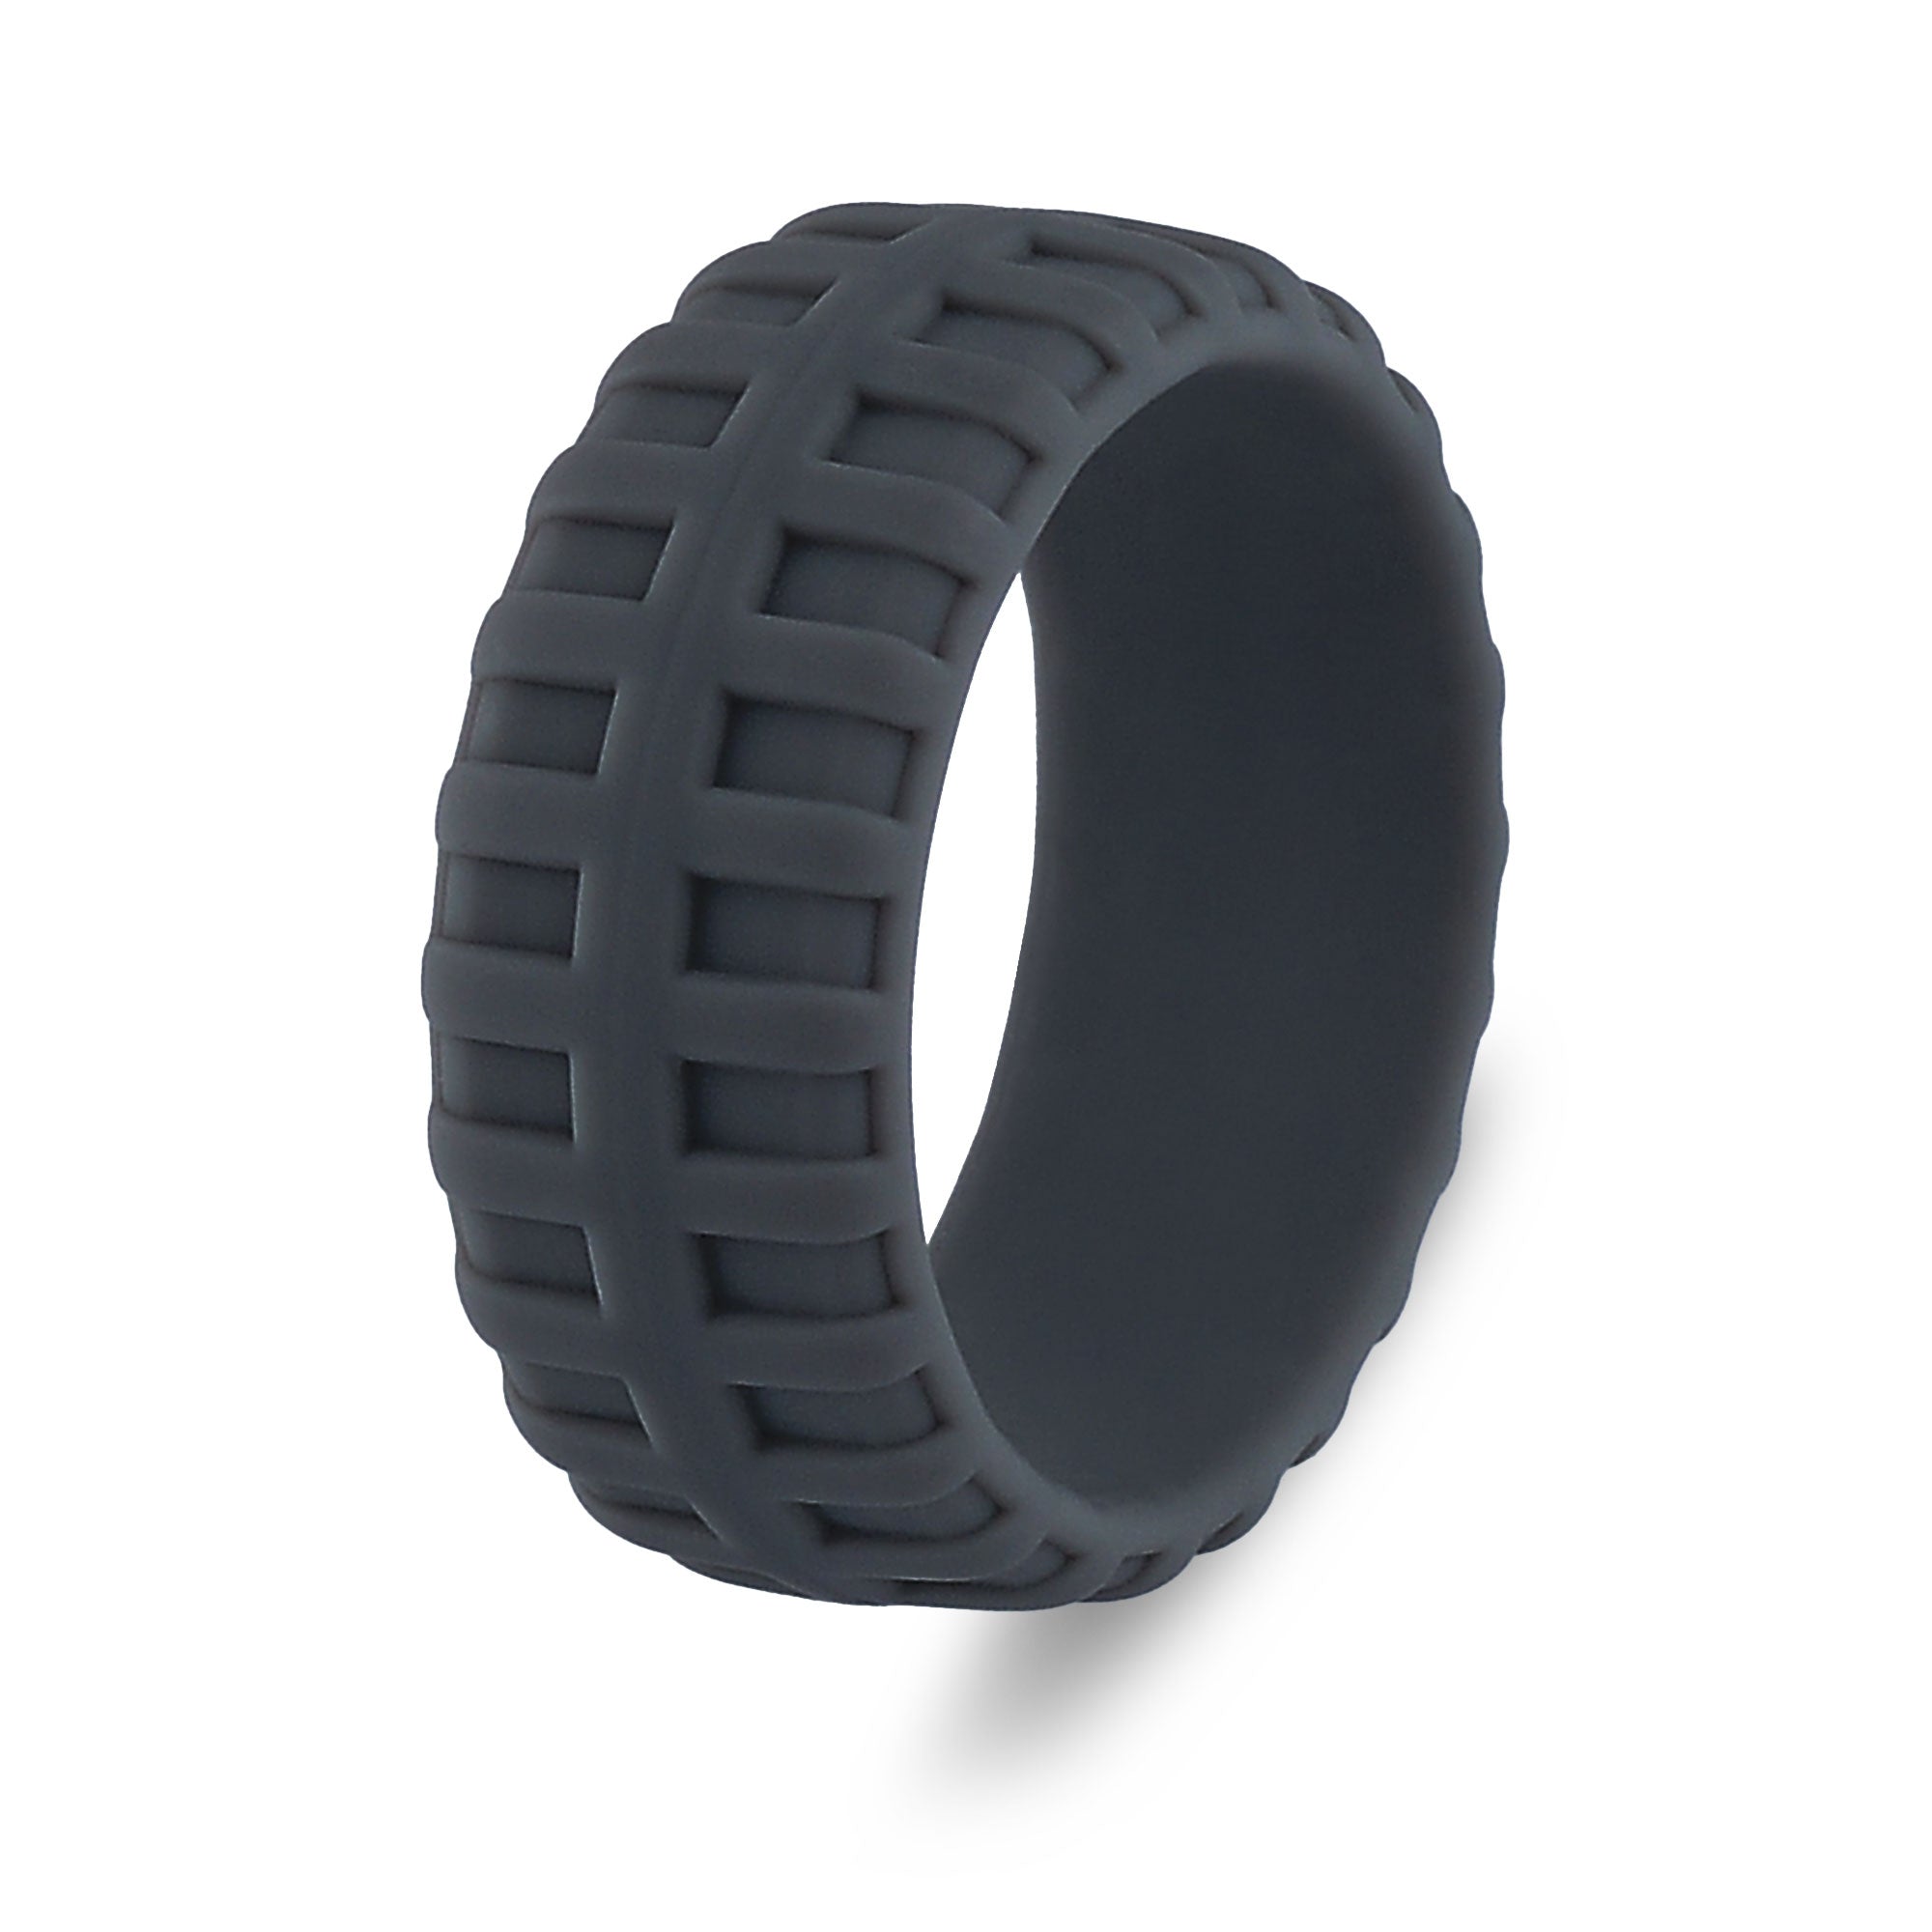 The Steelguard - Silicone Ring